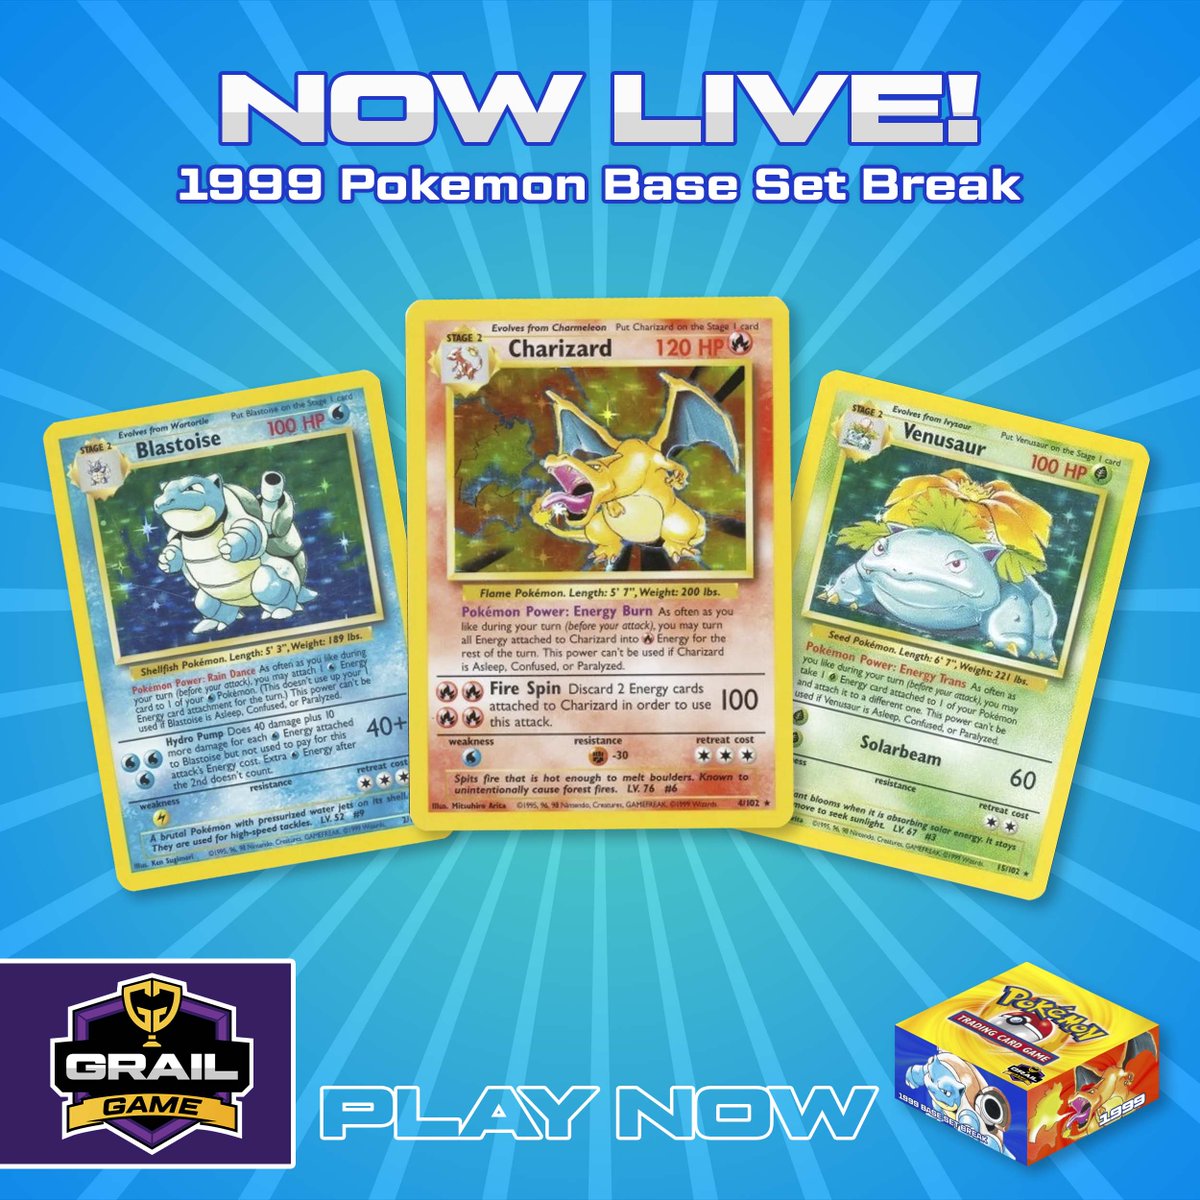 #GrailGamers! #PokémonFans! Pokémon Set Breaks #MysteryBox Game is NOW LIVE!! 🎉 ⁠ Not 1, or 2, but 3 #PokemonCard Set Breaks! (1999 Pokémon Base, 1998 Pokémon Rocket Japanese, and 25th Anniversary Pokémon Celebrations) Plus featuring favorites such as #Blastoise, #Mewtwo,